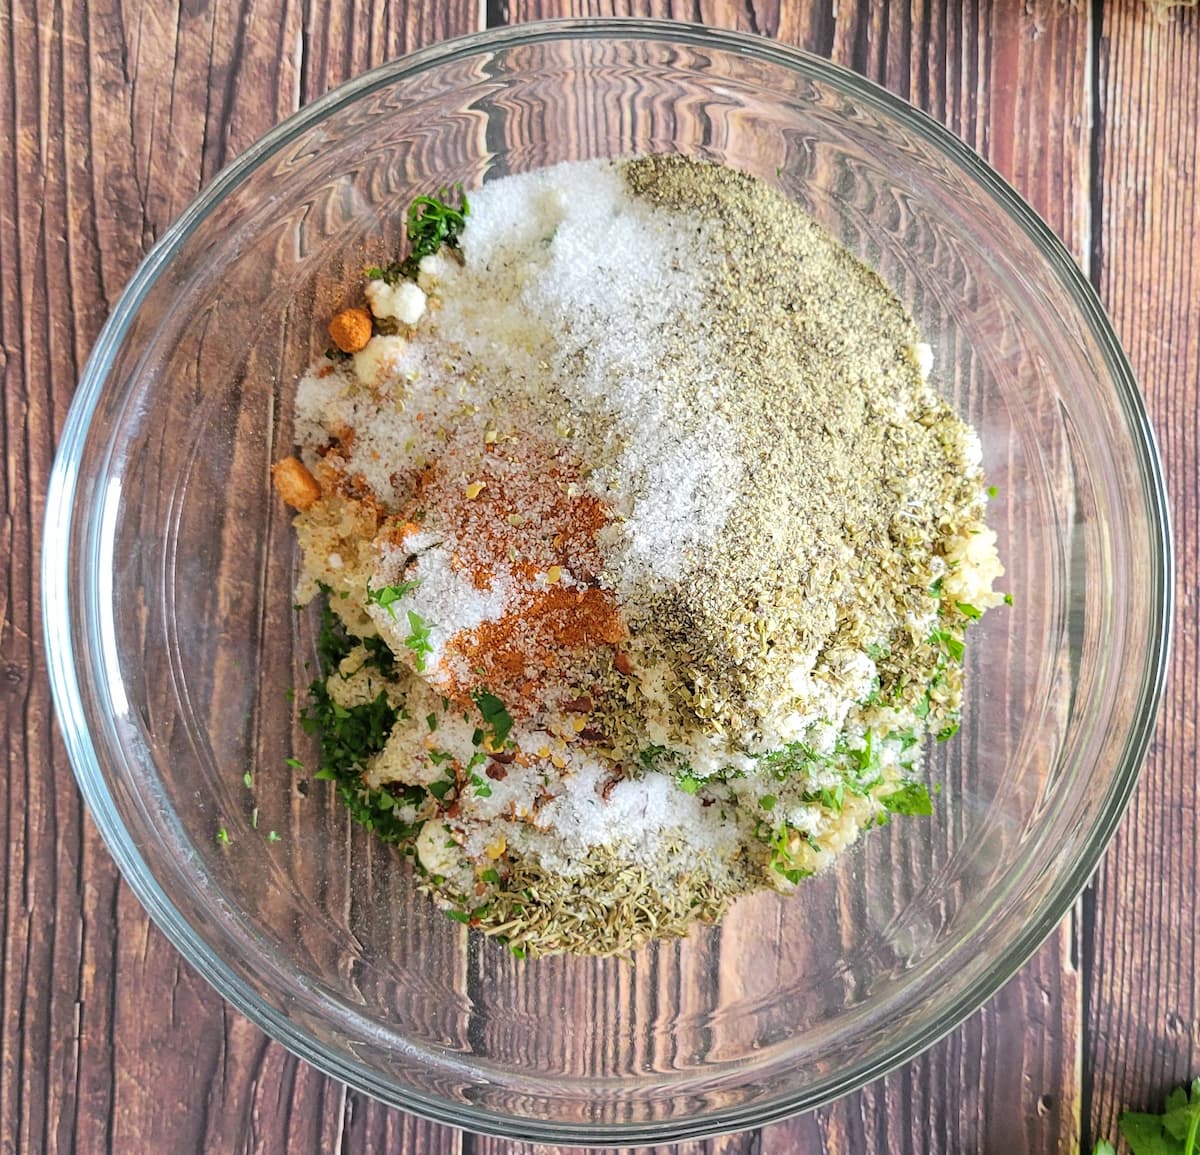 parmesan, salt, pepper, spices and other ingredients in a bowl